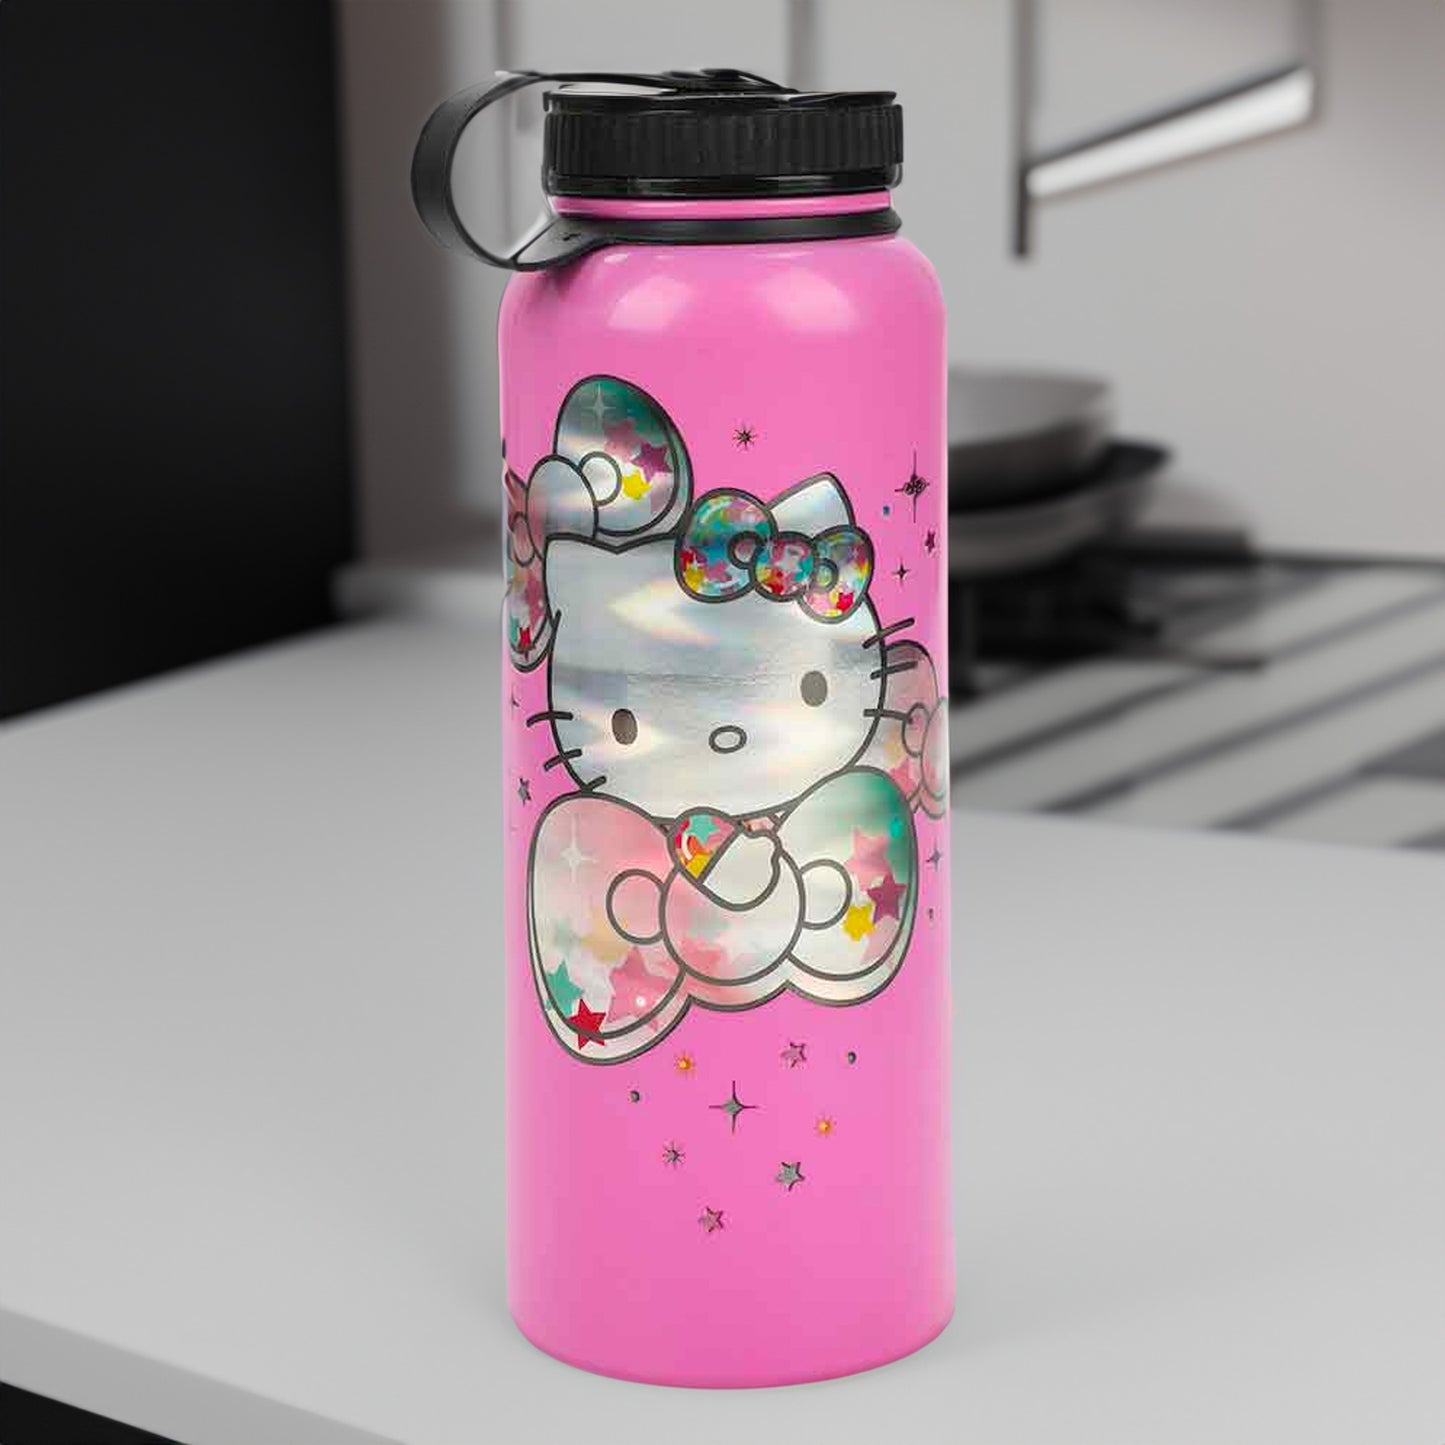 Hello Kitty (Sanrio) Holographic 40 oz. Stainless Steel Water Bottle